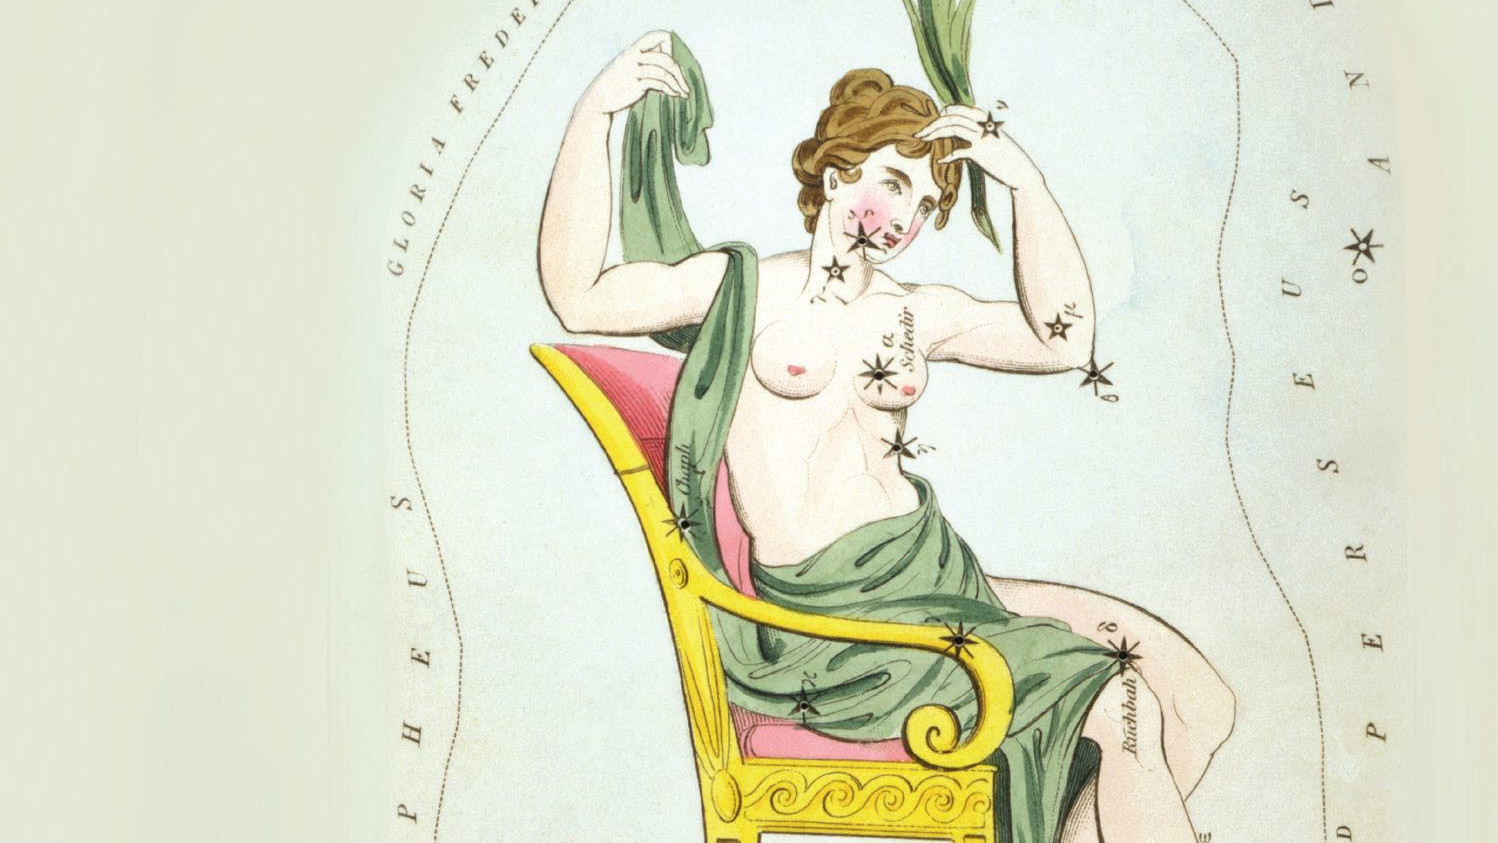 The constellation depicts the vain Queen Cassiopeia on her throne.